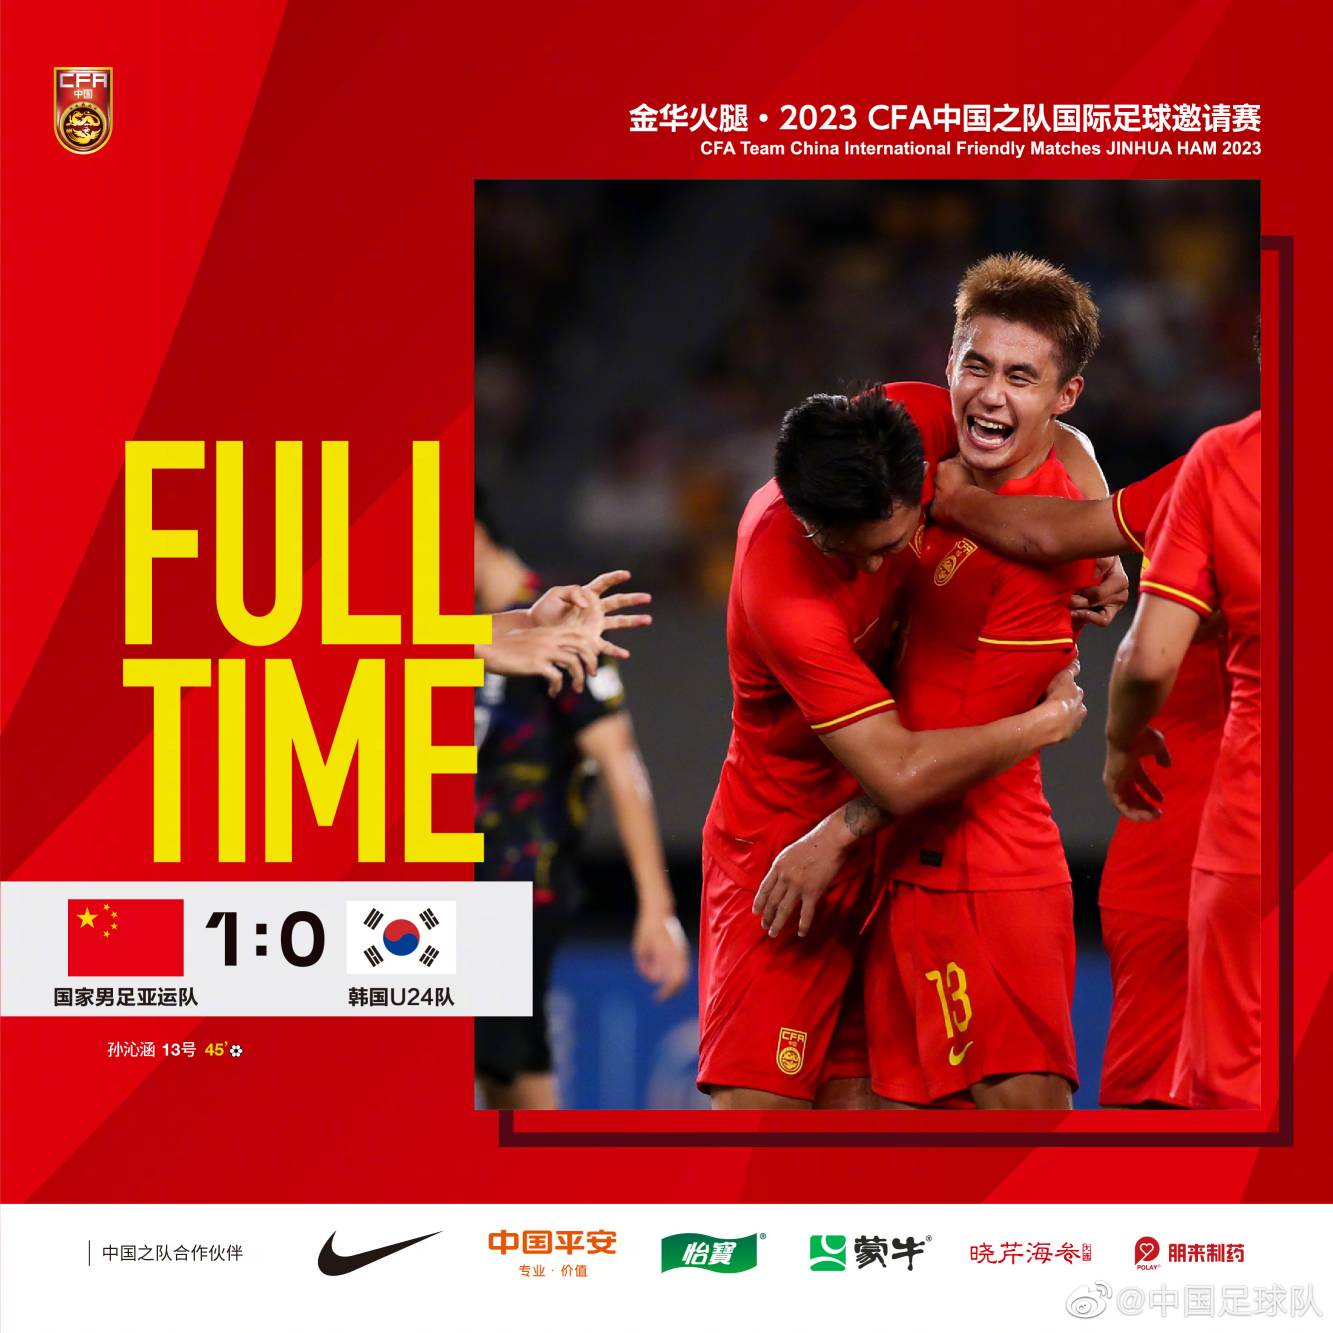 The Chinese Football Asian Games team fired their first shot and approached the Hangzhou Asian Games: China and India welcomed the football event "Earth Derby"